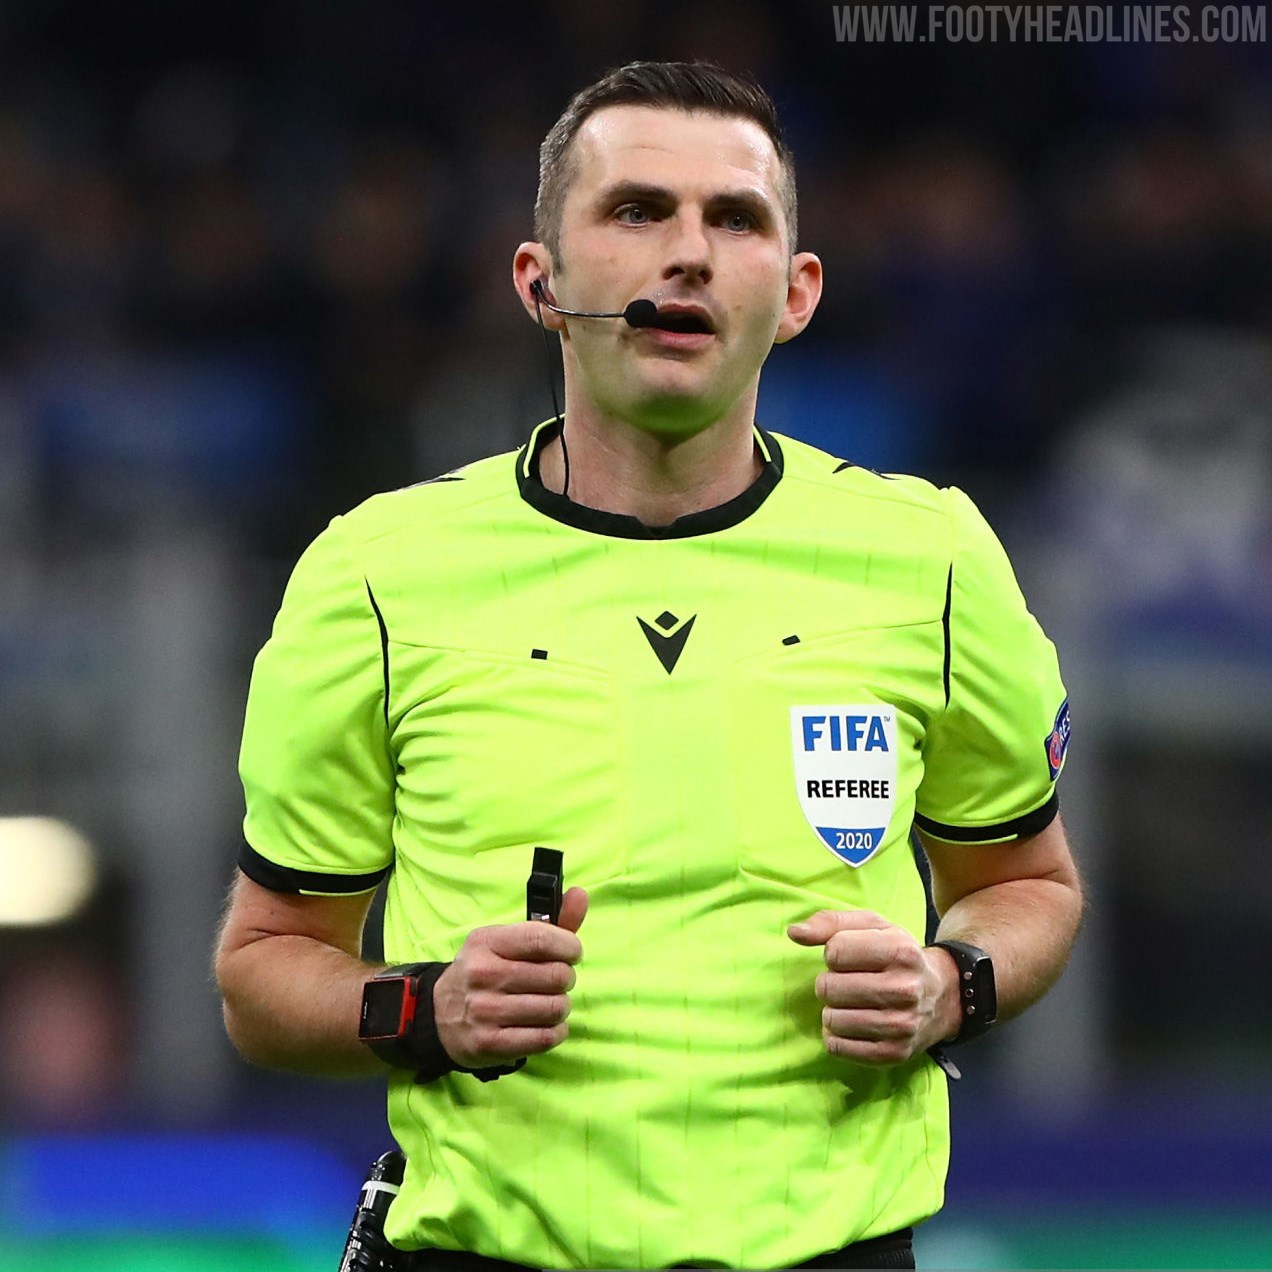 UEFA Releases Own Referee Badge, Replacing FIFA's - Footy Headlines